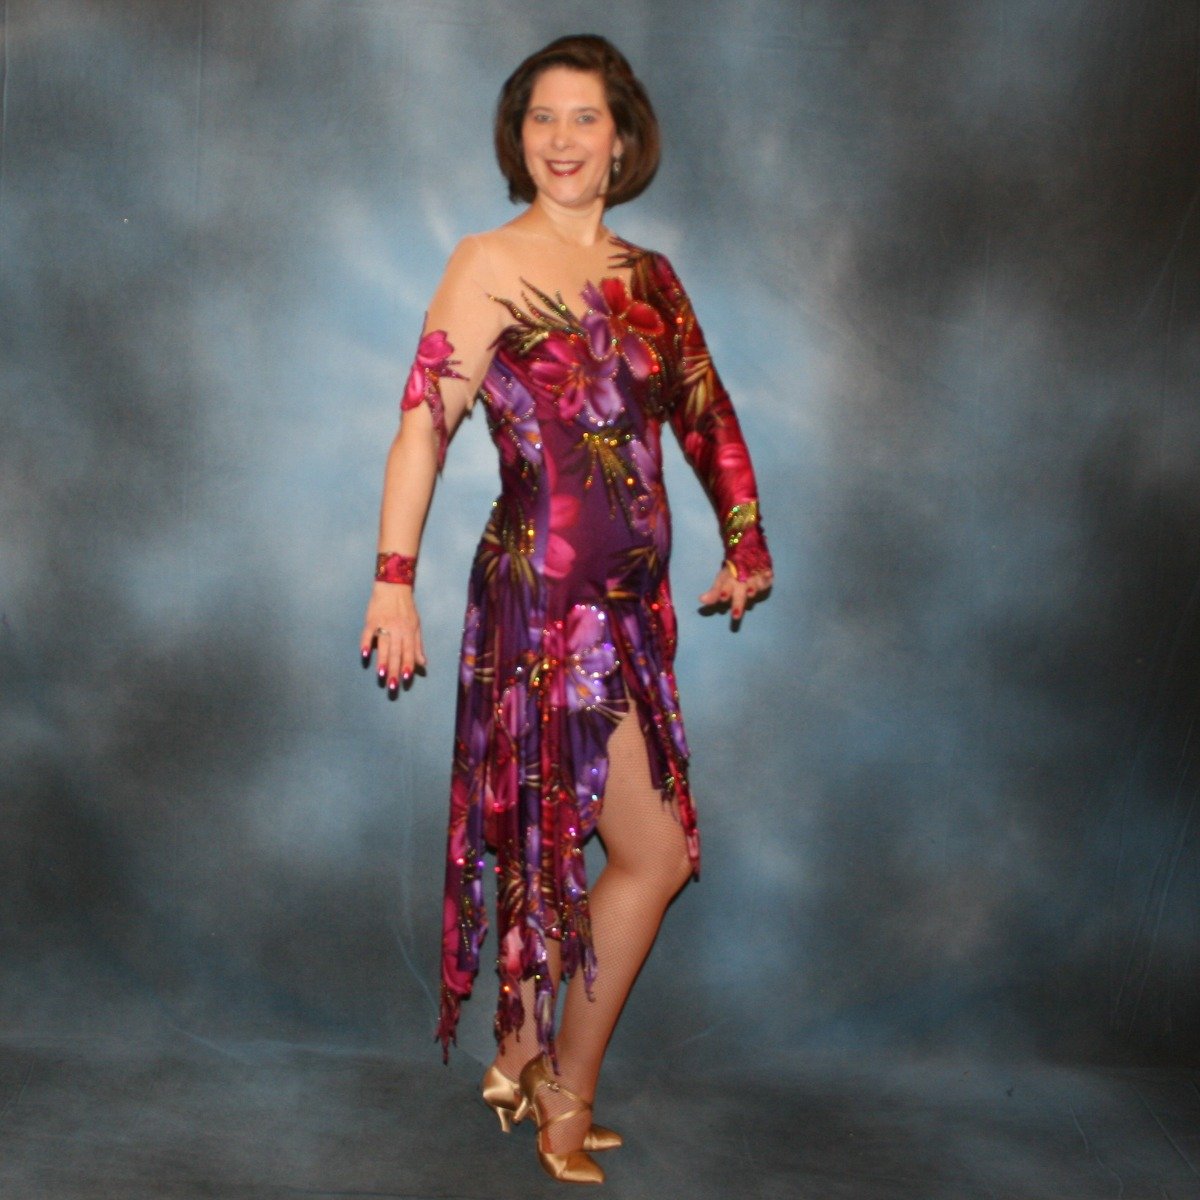 Crystal's Creations Tropical print Latin/rhythm dress created in tropical print lycra in burgundies & purples on a nude illusion base, embellished lavishly with Swarovski rhinestone work in burgundies, purples, orchids & a touch of the greens & golds that are within the print.